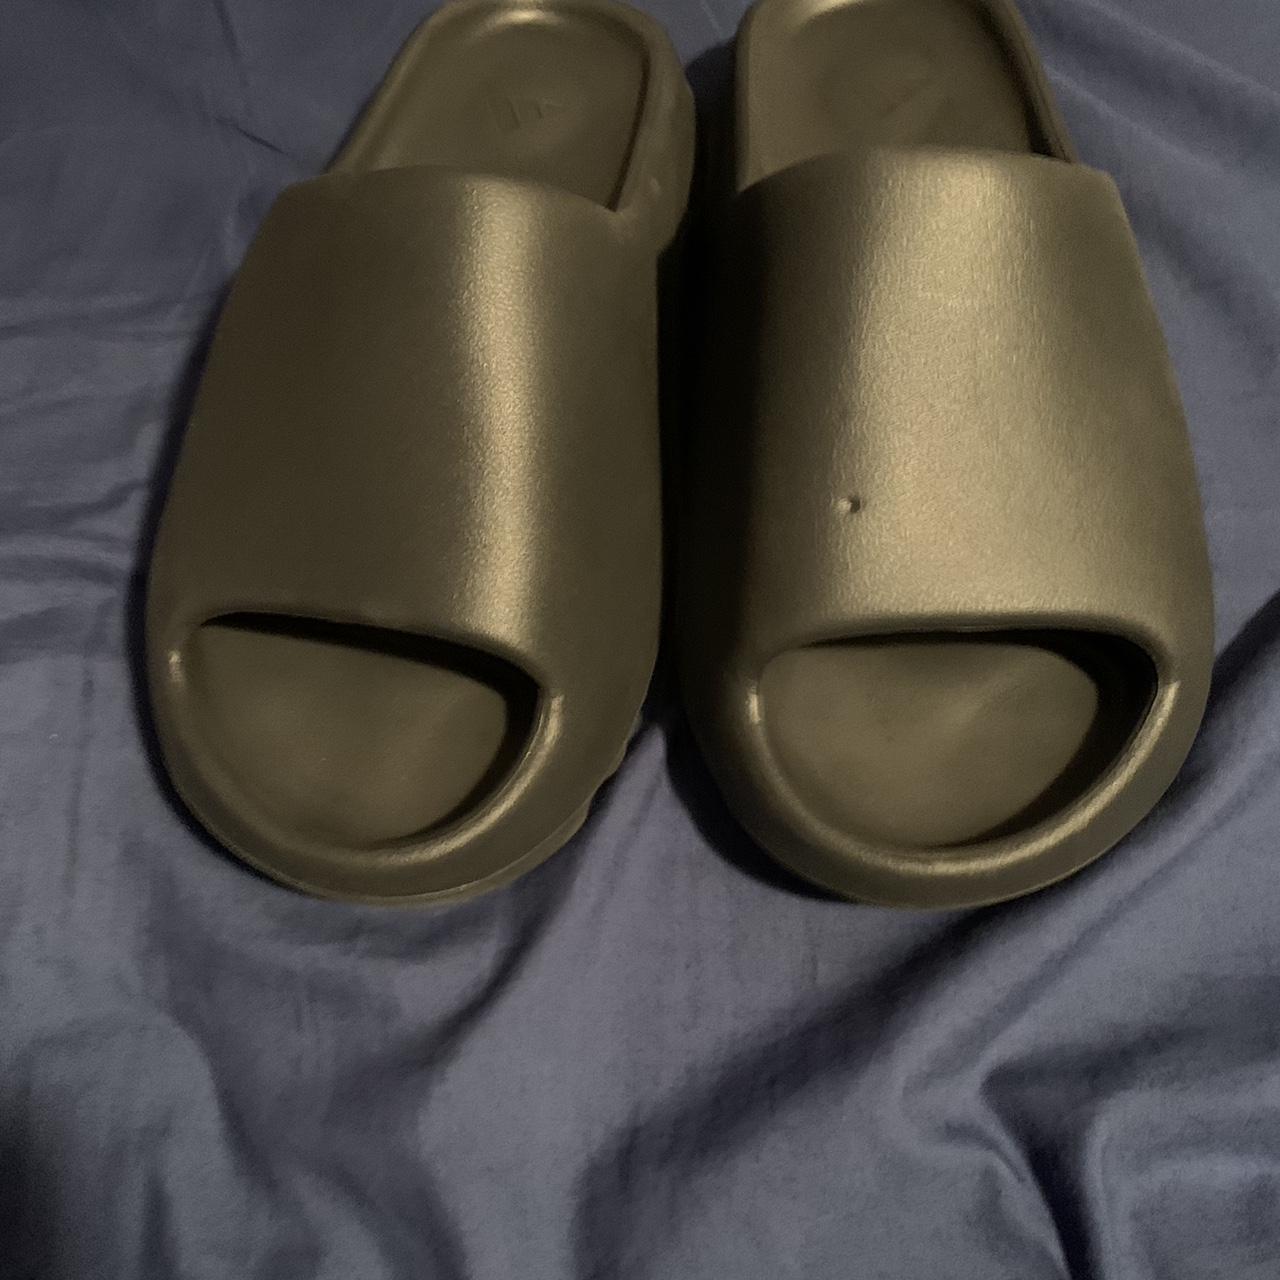 Onxy Yeezy Slides (with box) only can take 120 - Depop